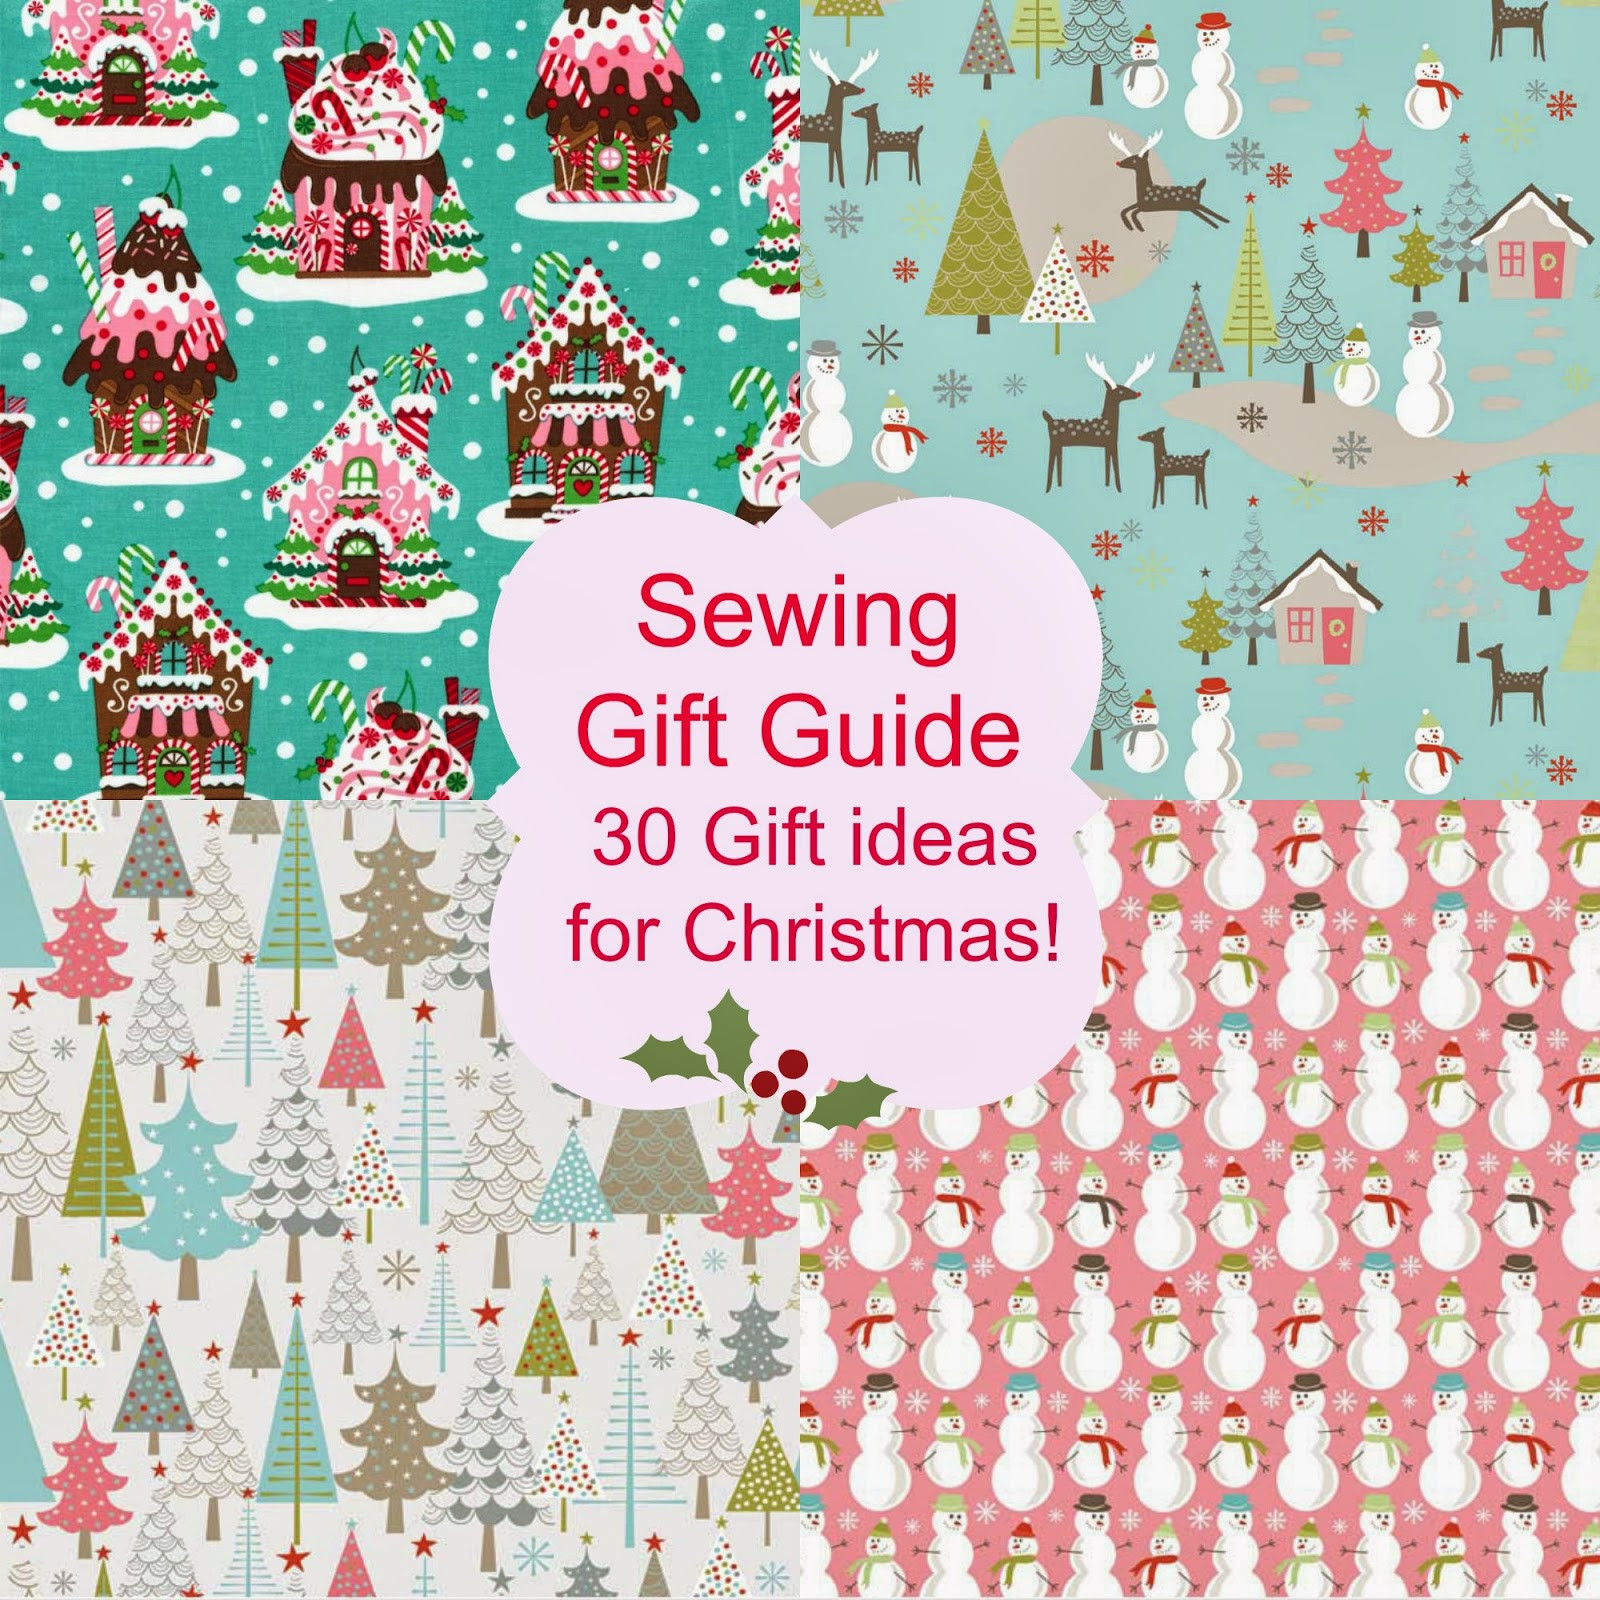 Sewing Christmas Gift Ideas
 Sew Scrumptious Christmas Sewing Gifts for Crafty People